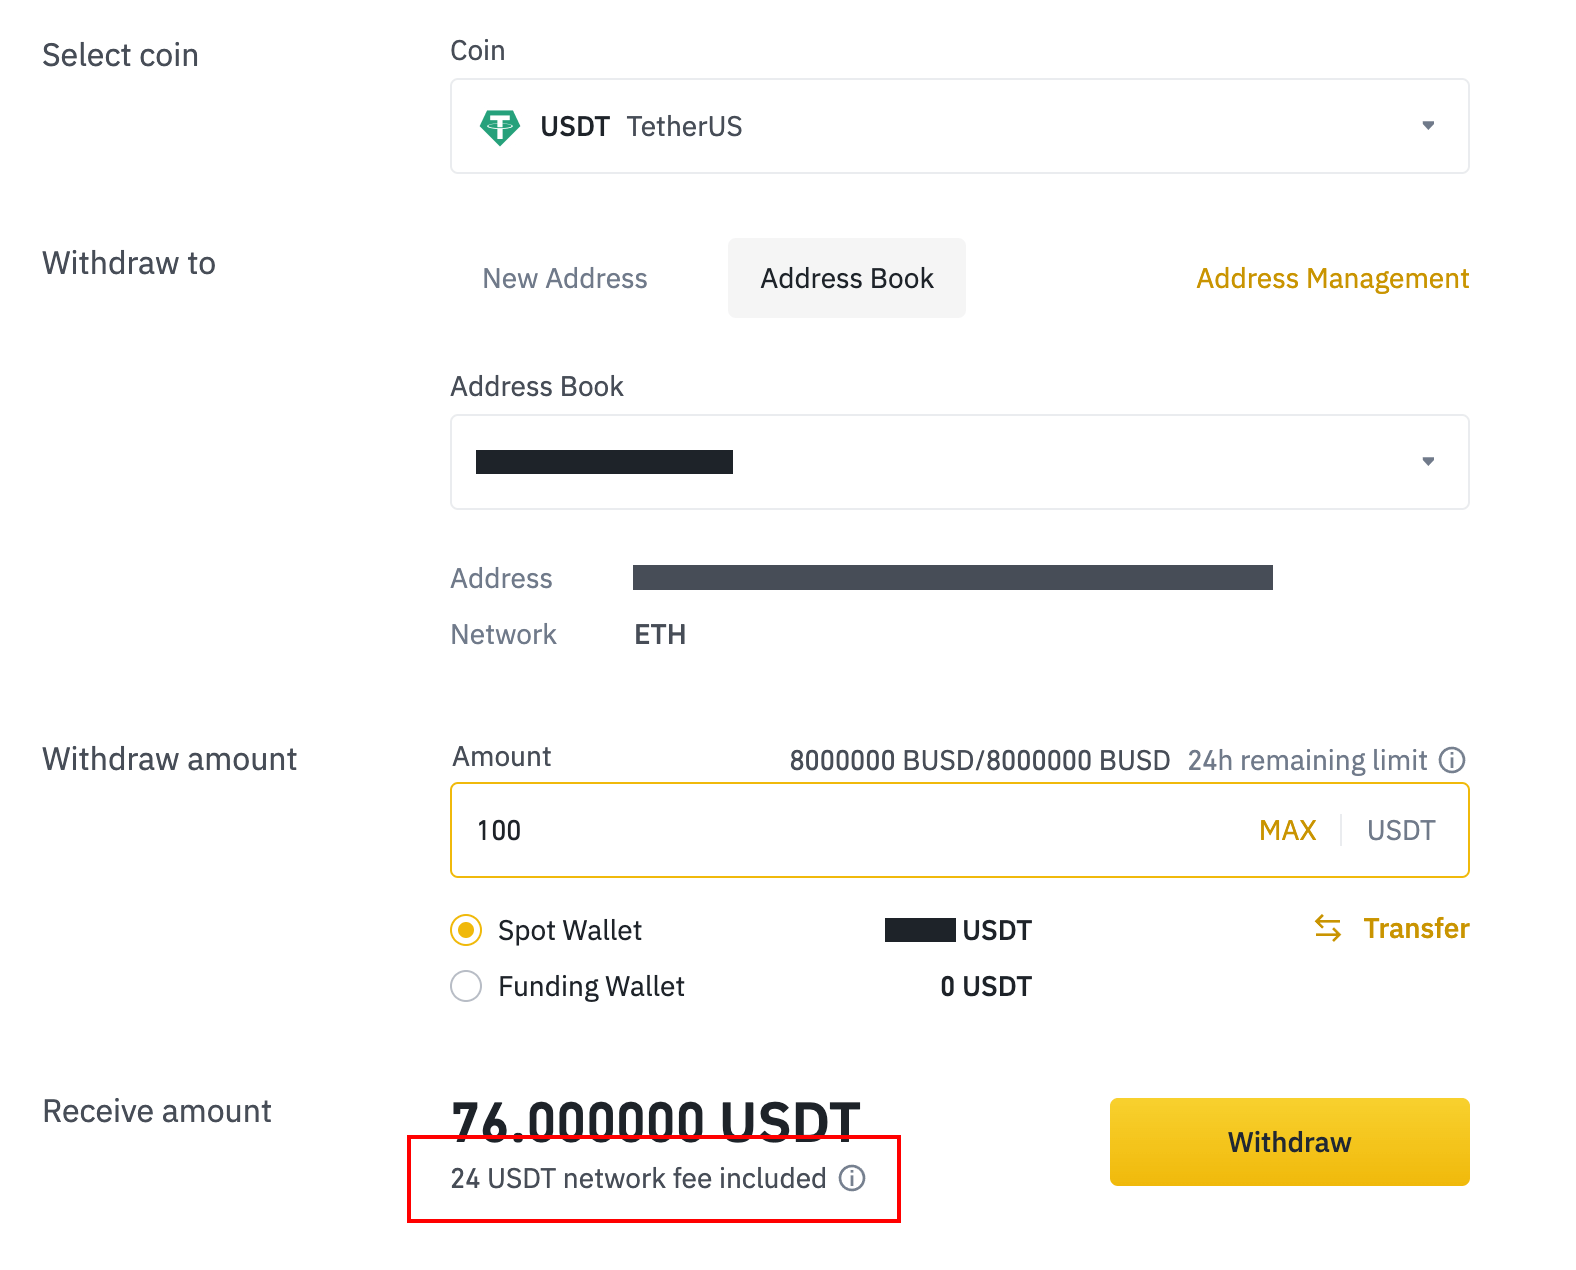 Illustration showing the high withdrawal fees on Binance. Withdrawing 100 USDT incurs 24 USDT as a fee.